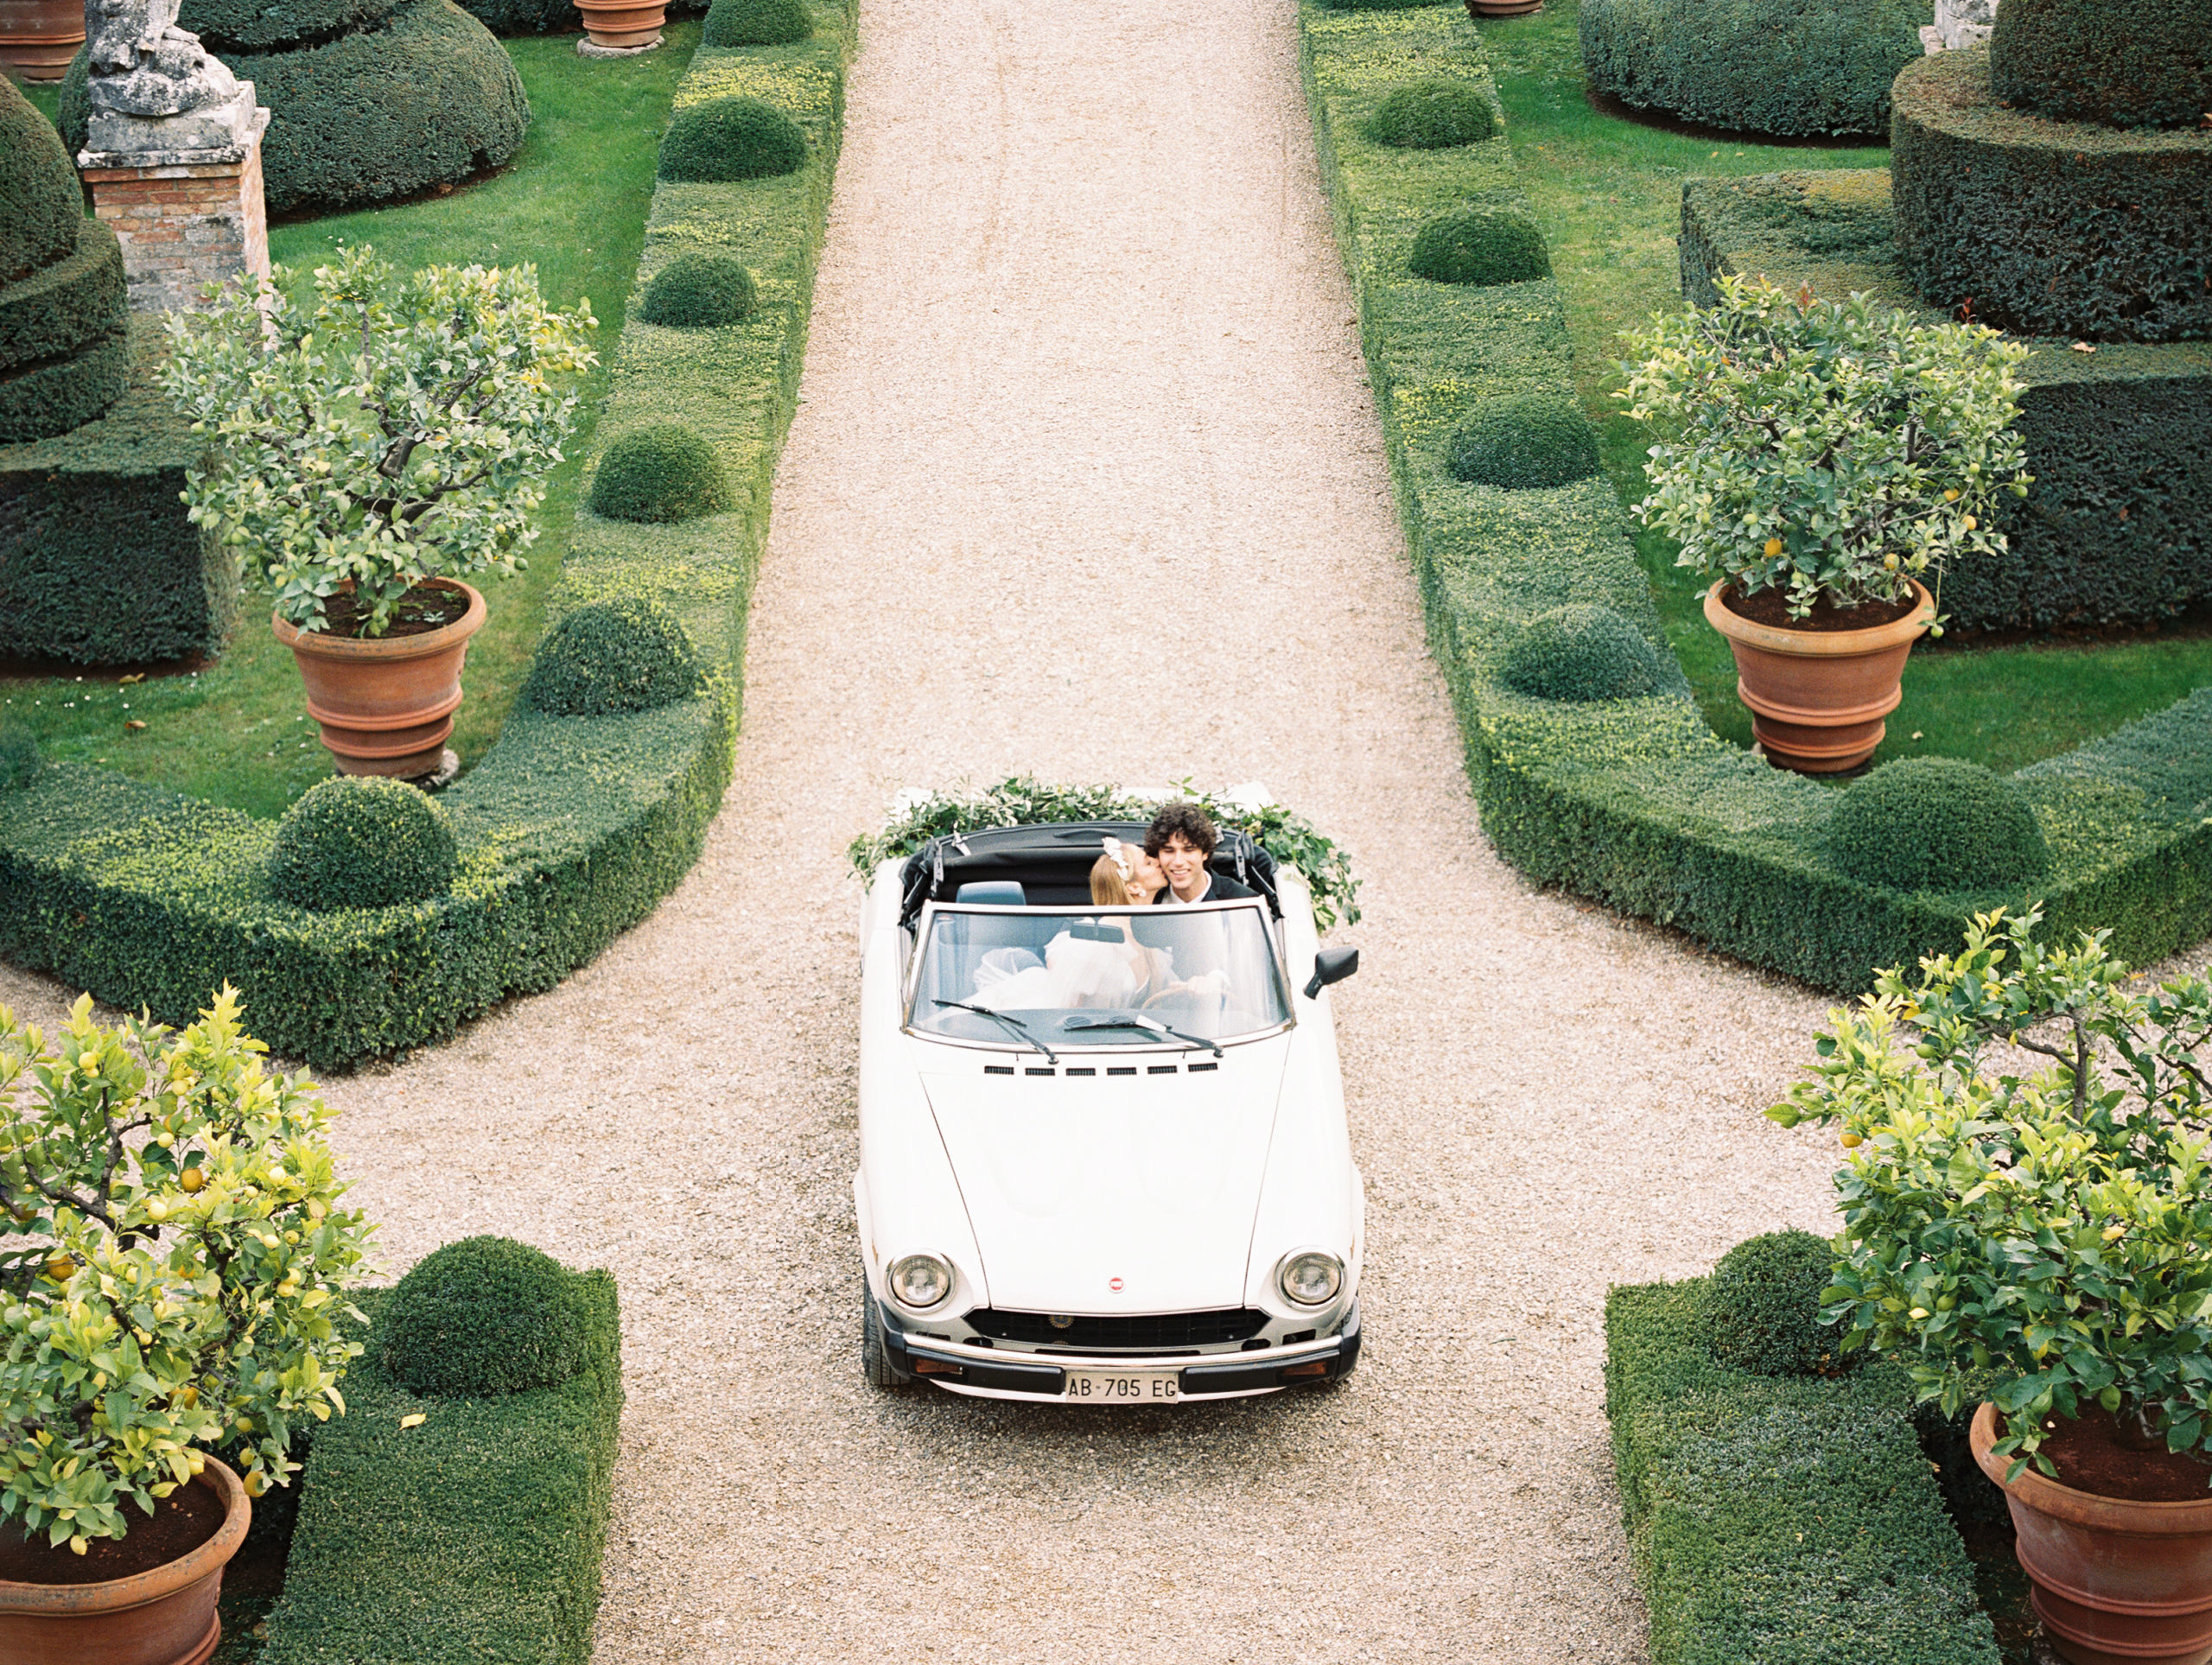 Bride kisses her groom in their convertible getaway car after their Tuscany, Italy wedding